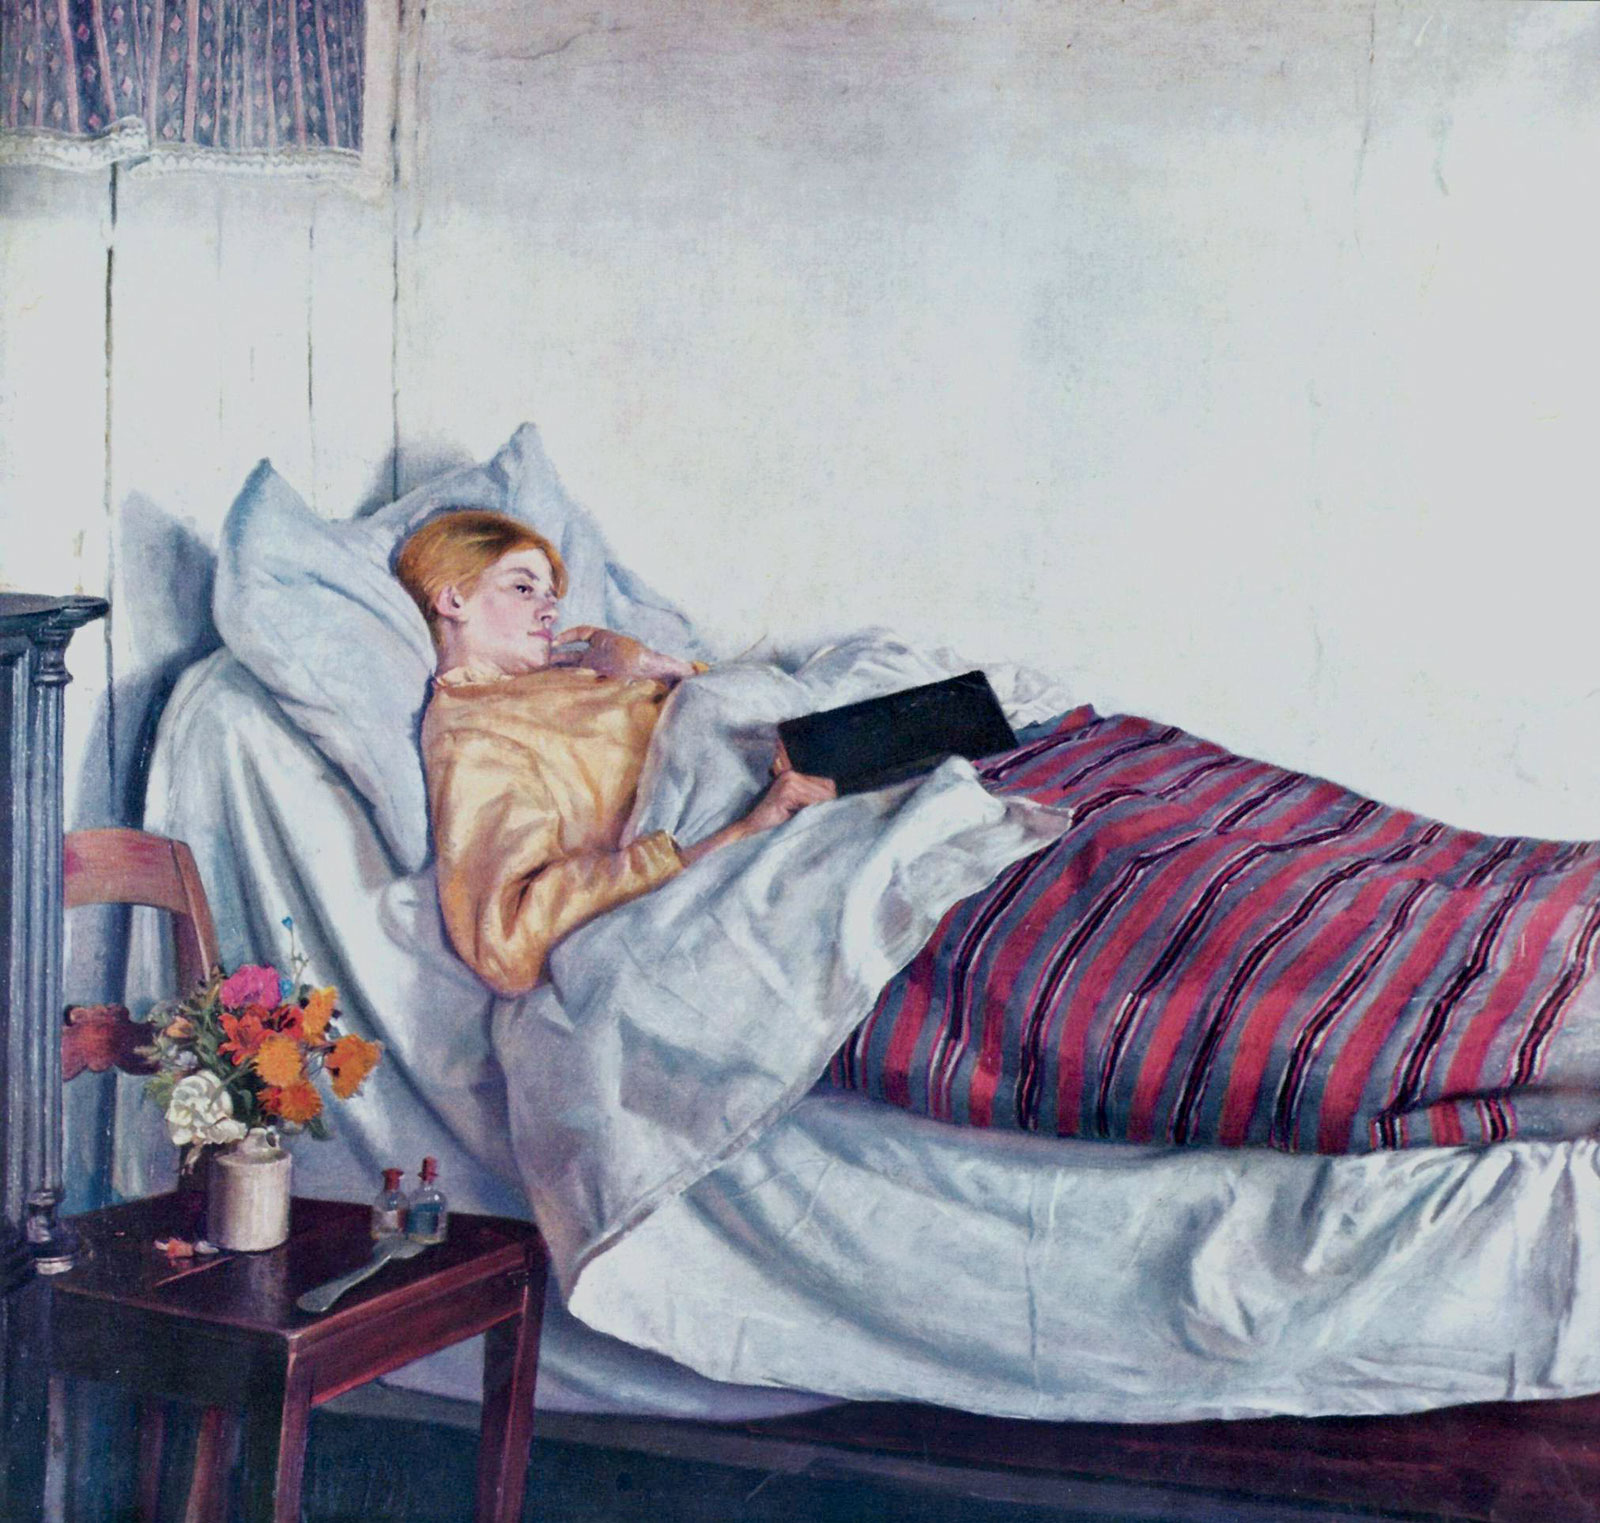 Michael Peter Ancher, *La muchacha enferma*, 1882. Statens Museum for Kunst